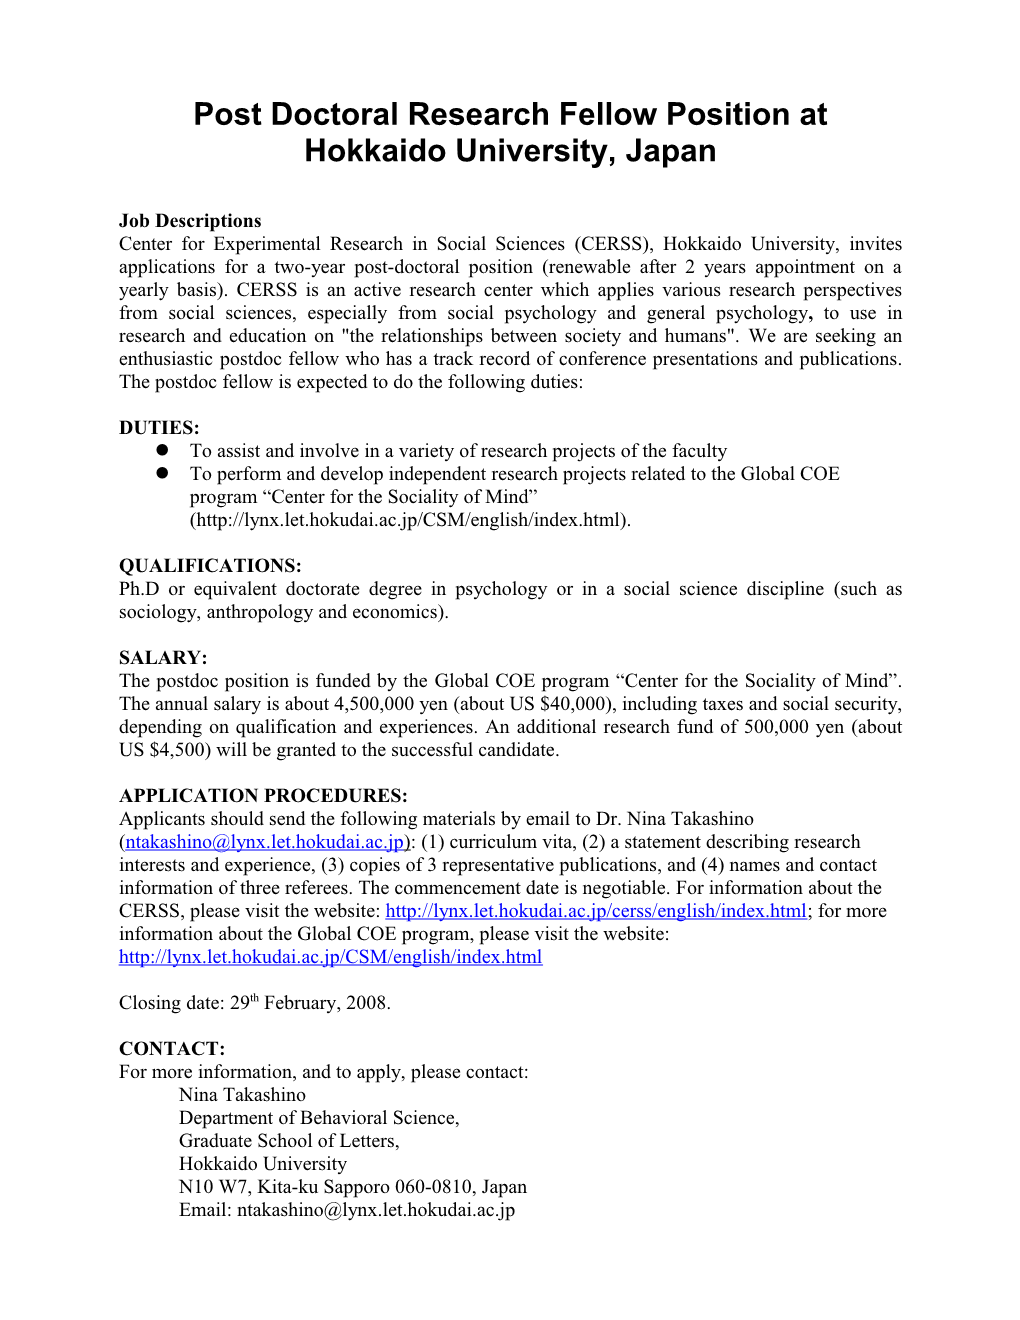 Post Doctoral Research Fellow Position at Hokkaido University, Japan